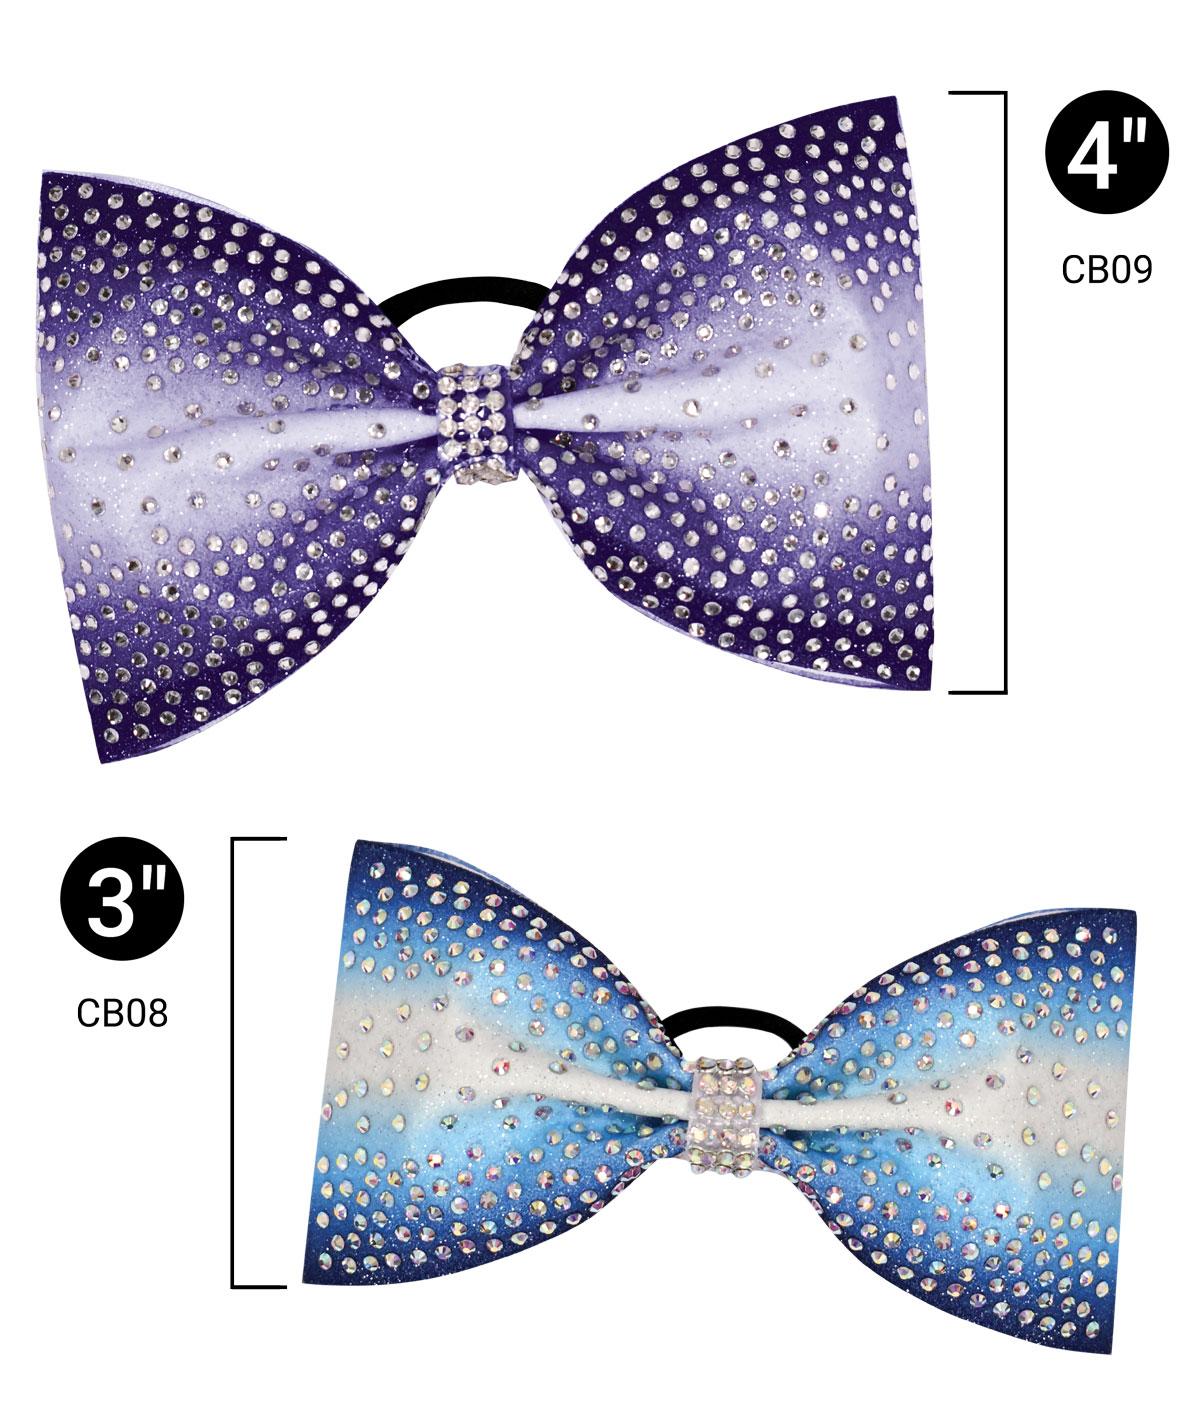 Large Sublimated Belle Tailless Custom Hair Bow With Rhinestones